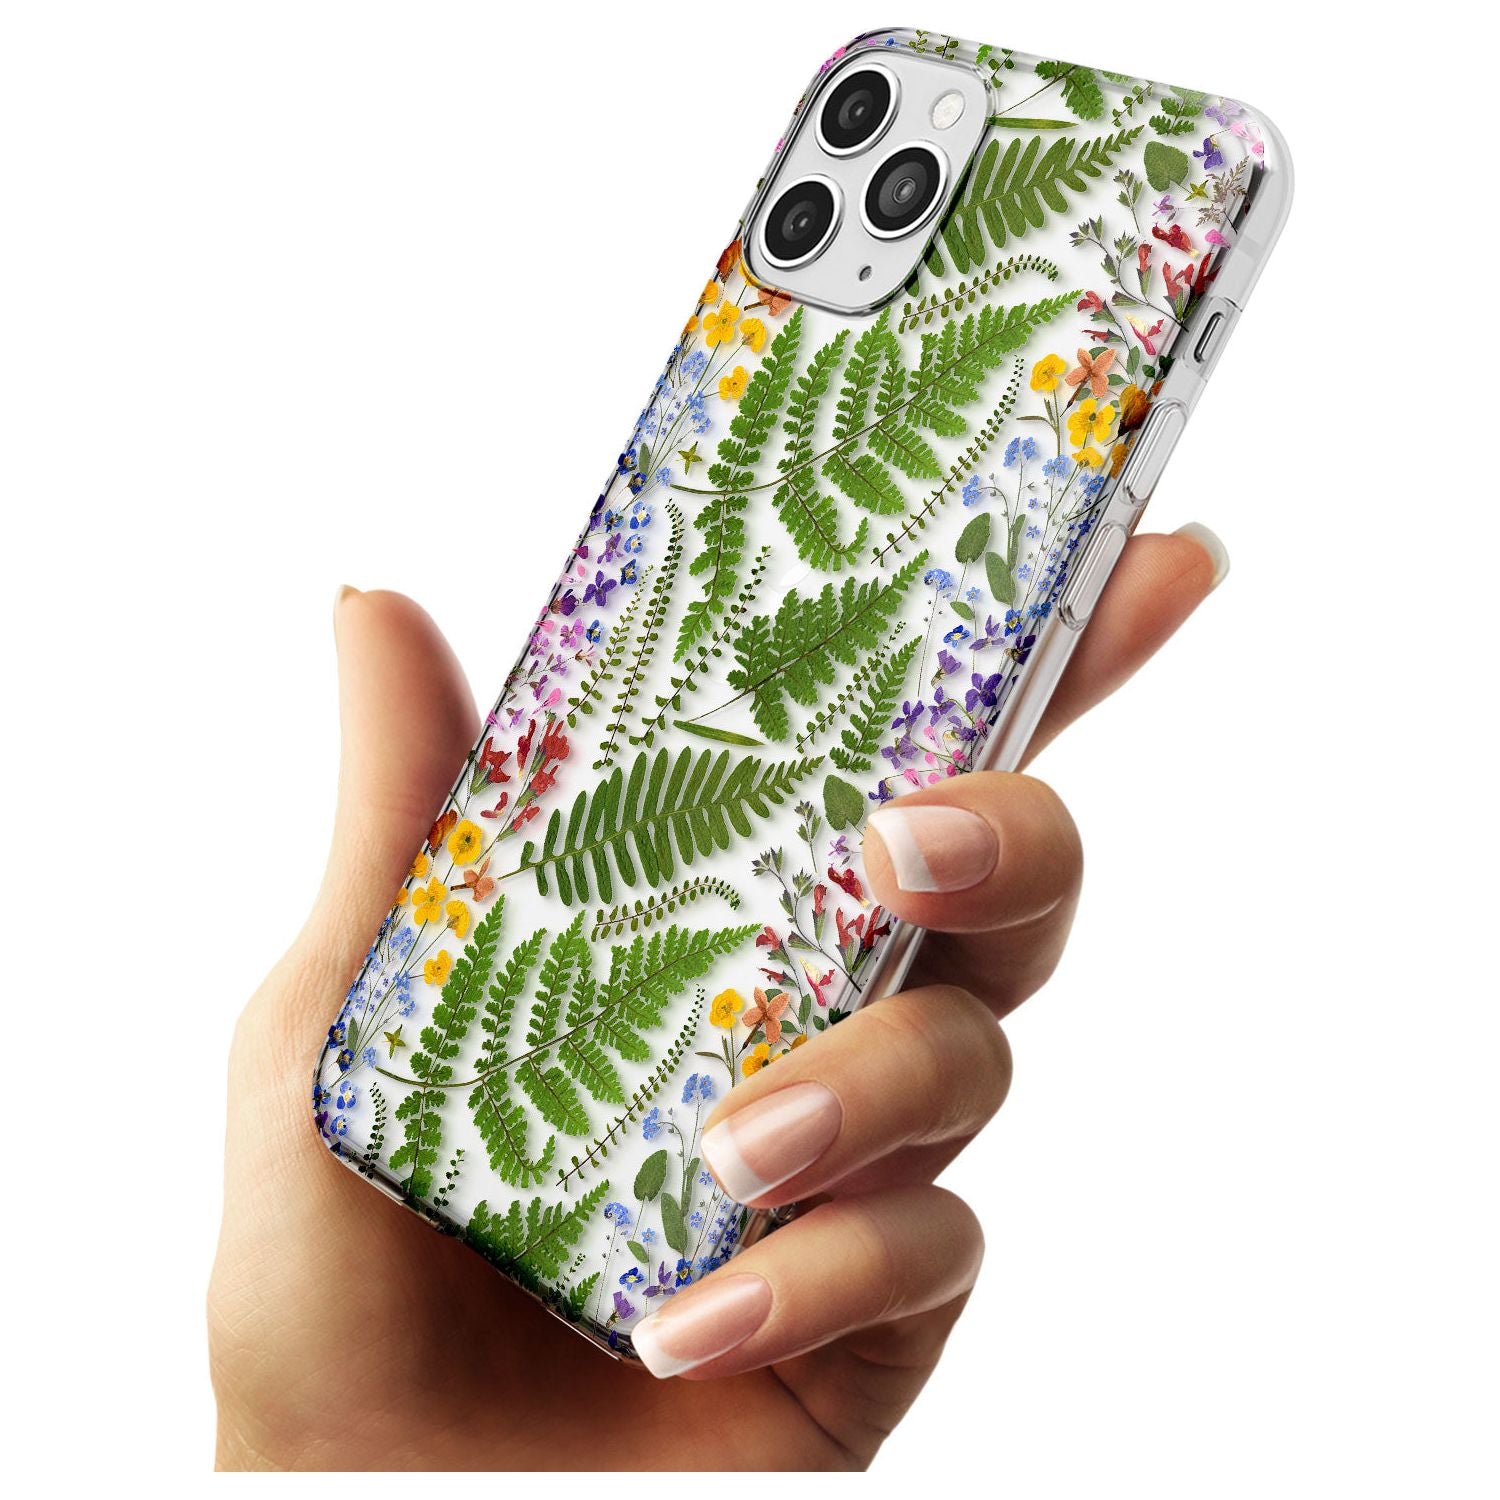 Busy Floral and Fern Design Slim TPU Phone Case for iPhone 11 Pro Max